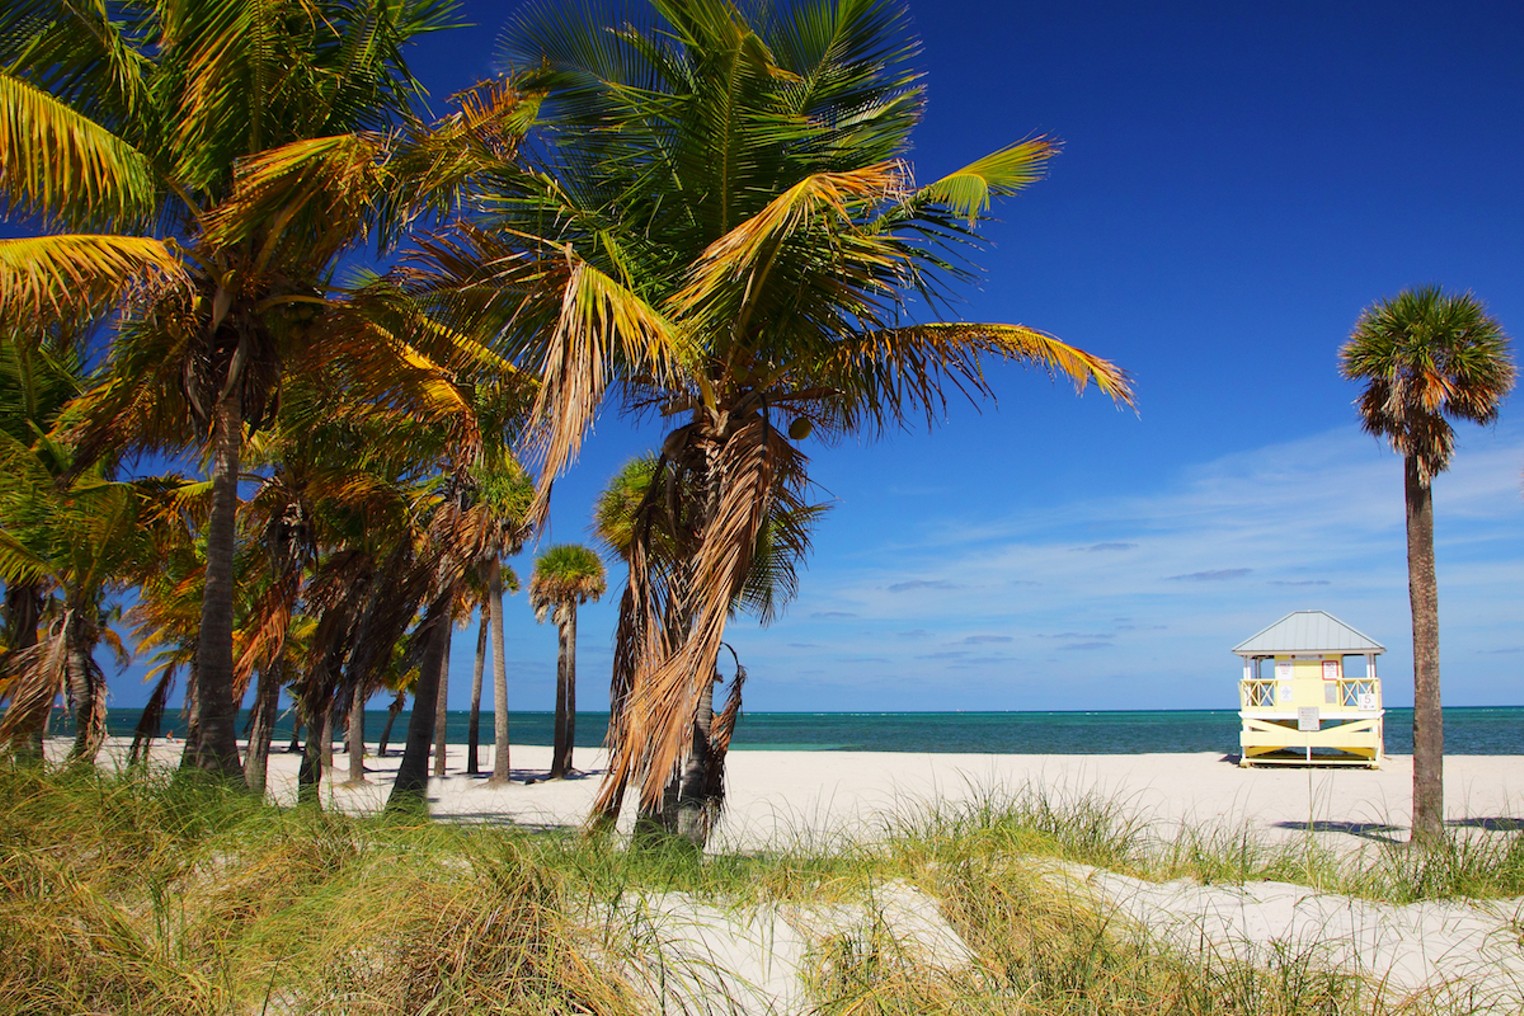 Best Beach (Miami) 2022 Crandon Park Beach Best Restaurants, Bars, Clubs, Music and Stores in Miami Miami New Times pic picture